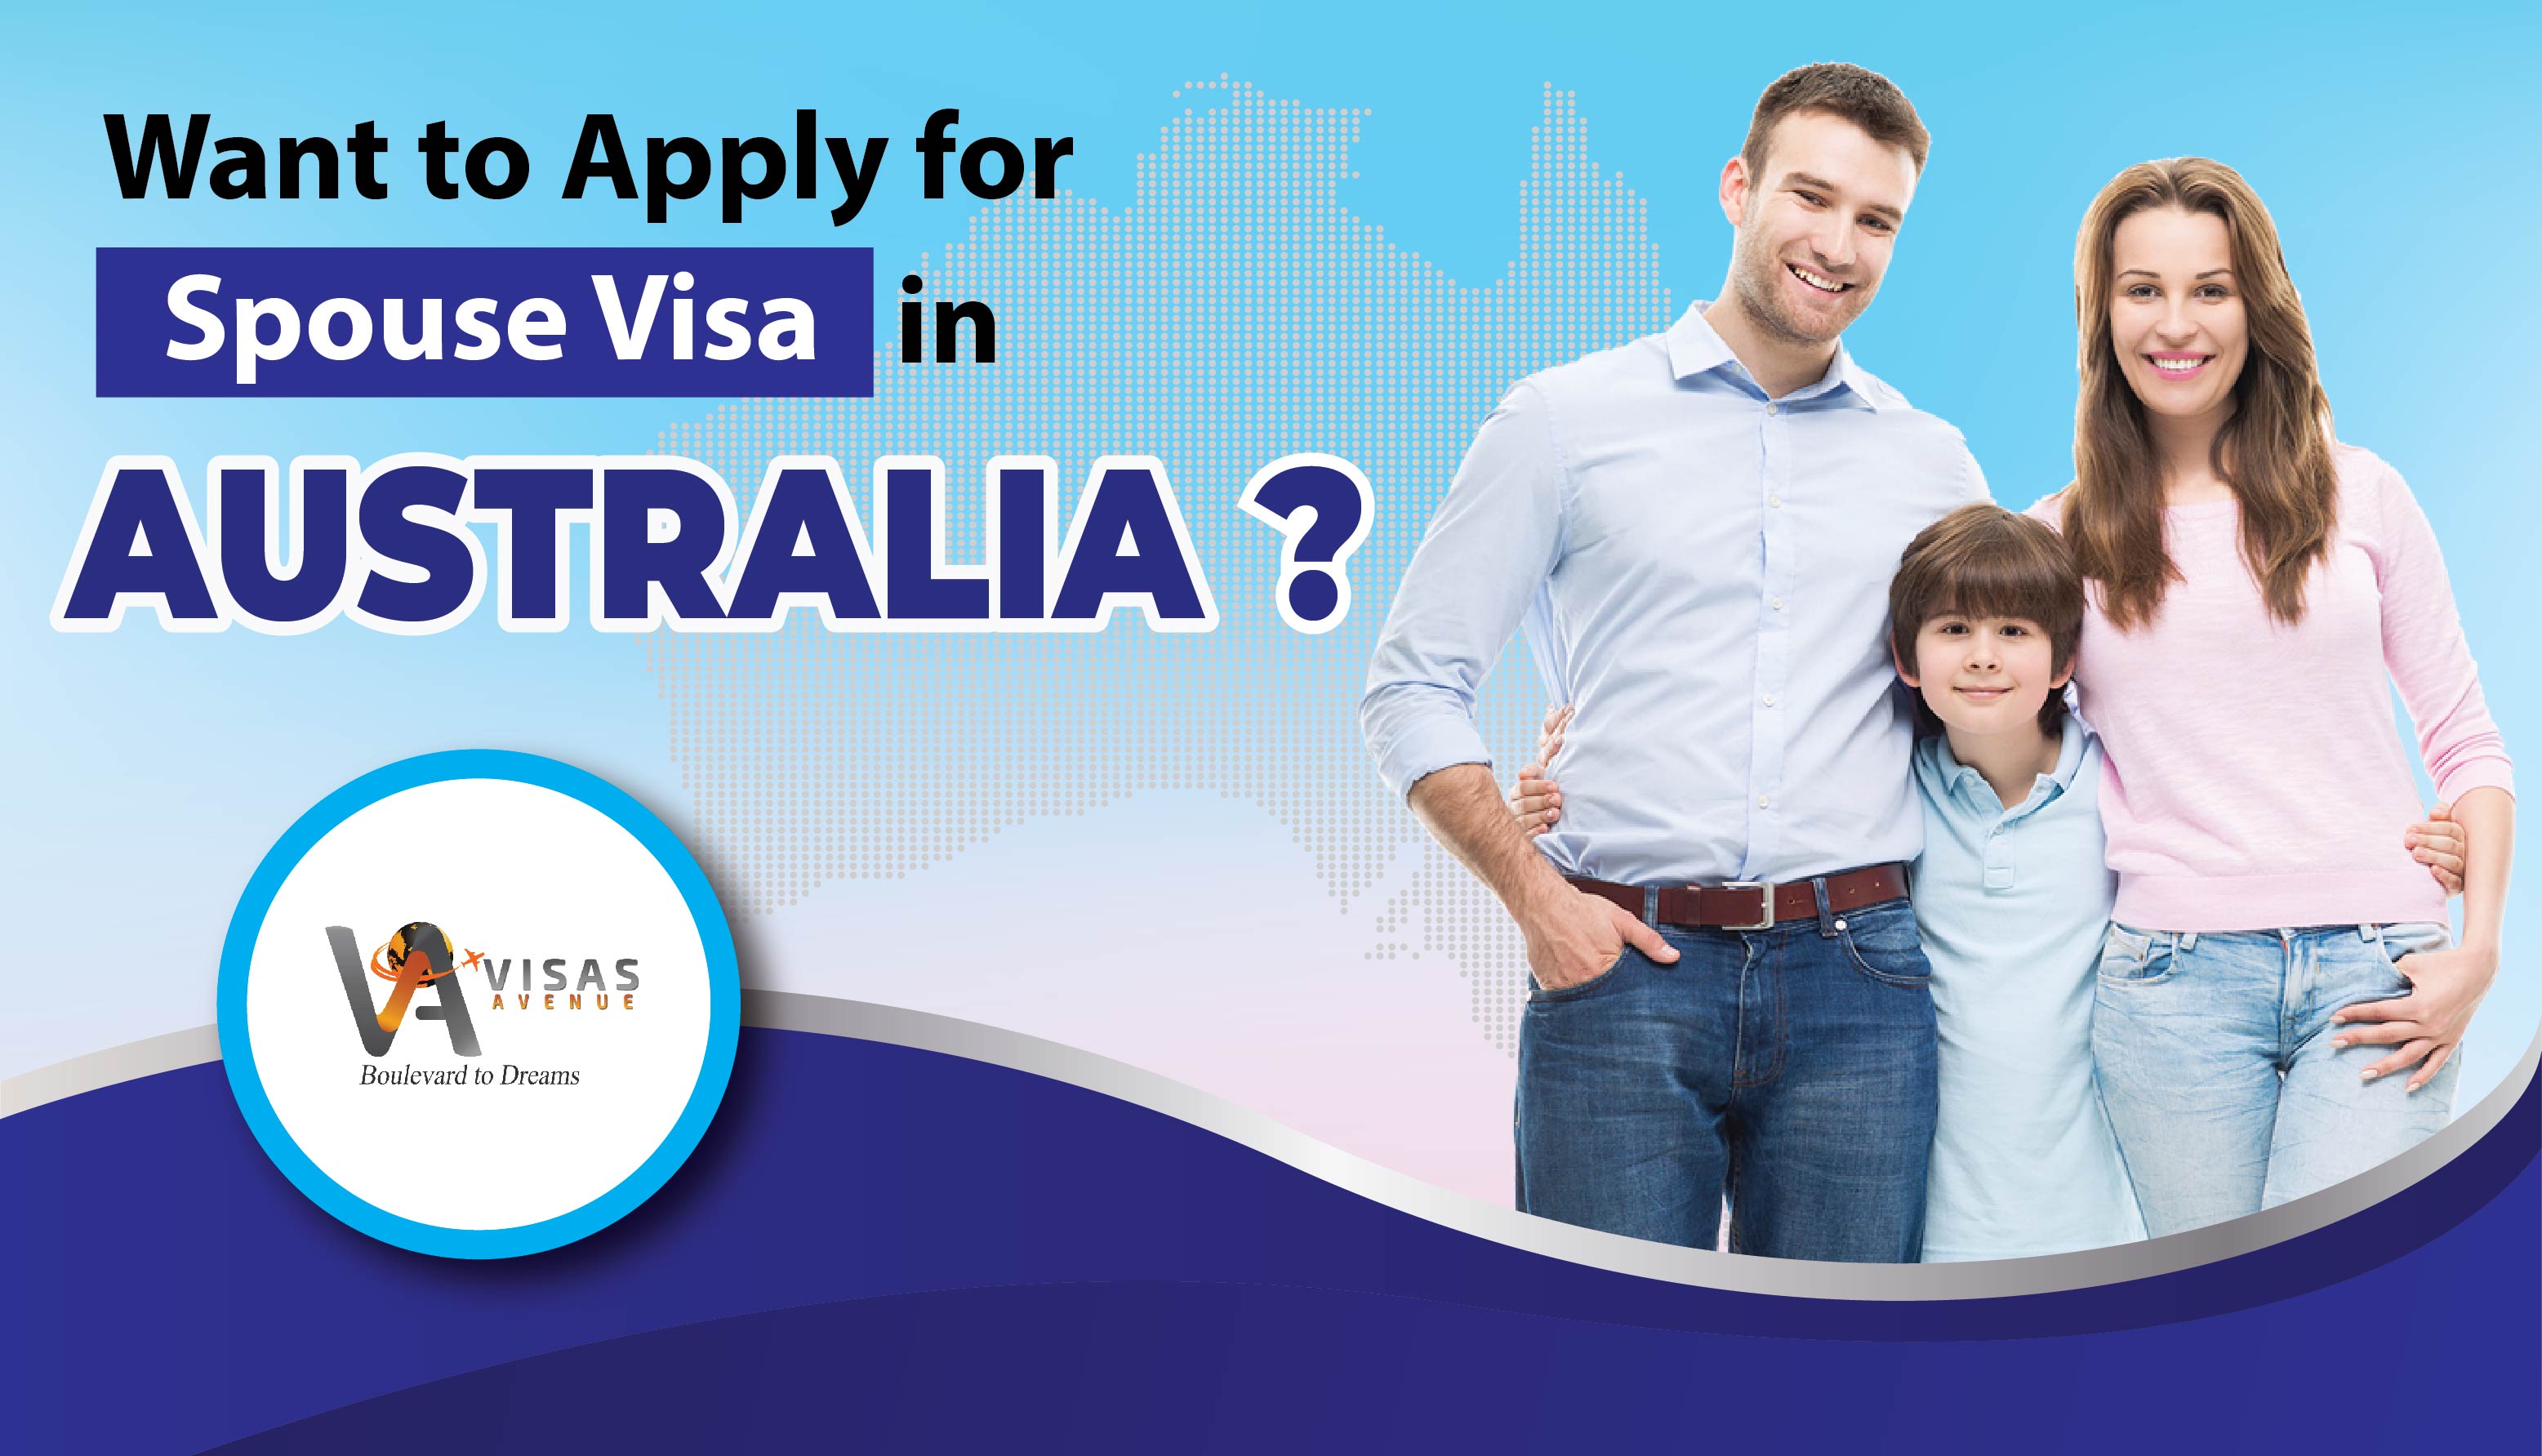 Want to bring your Spouse to Australia? Find out the Relevant Spouse Visa category?